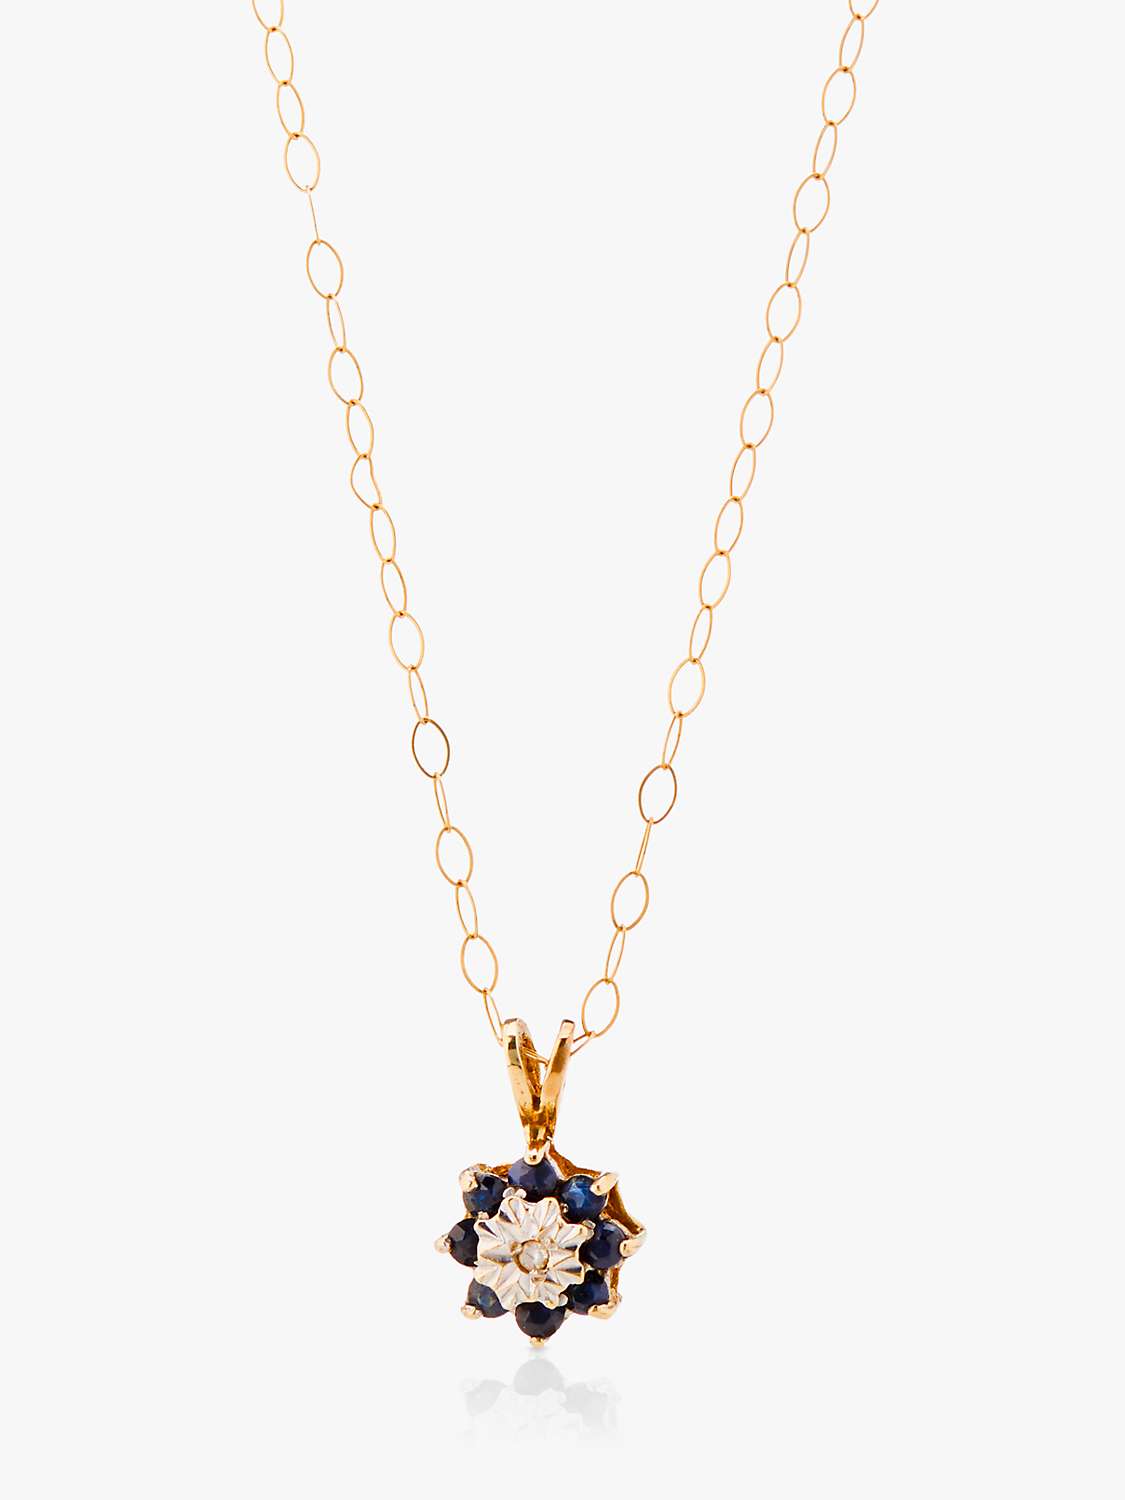 Buy L & T Heirlooms 9ct Yellow Gold Second Hand Sapphire Pendant Necklace Online at johnlewis.com